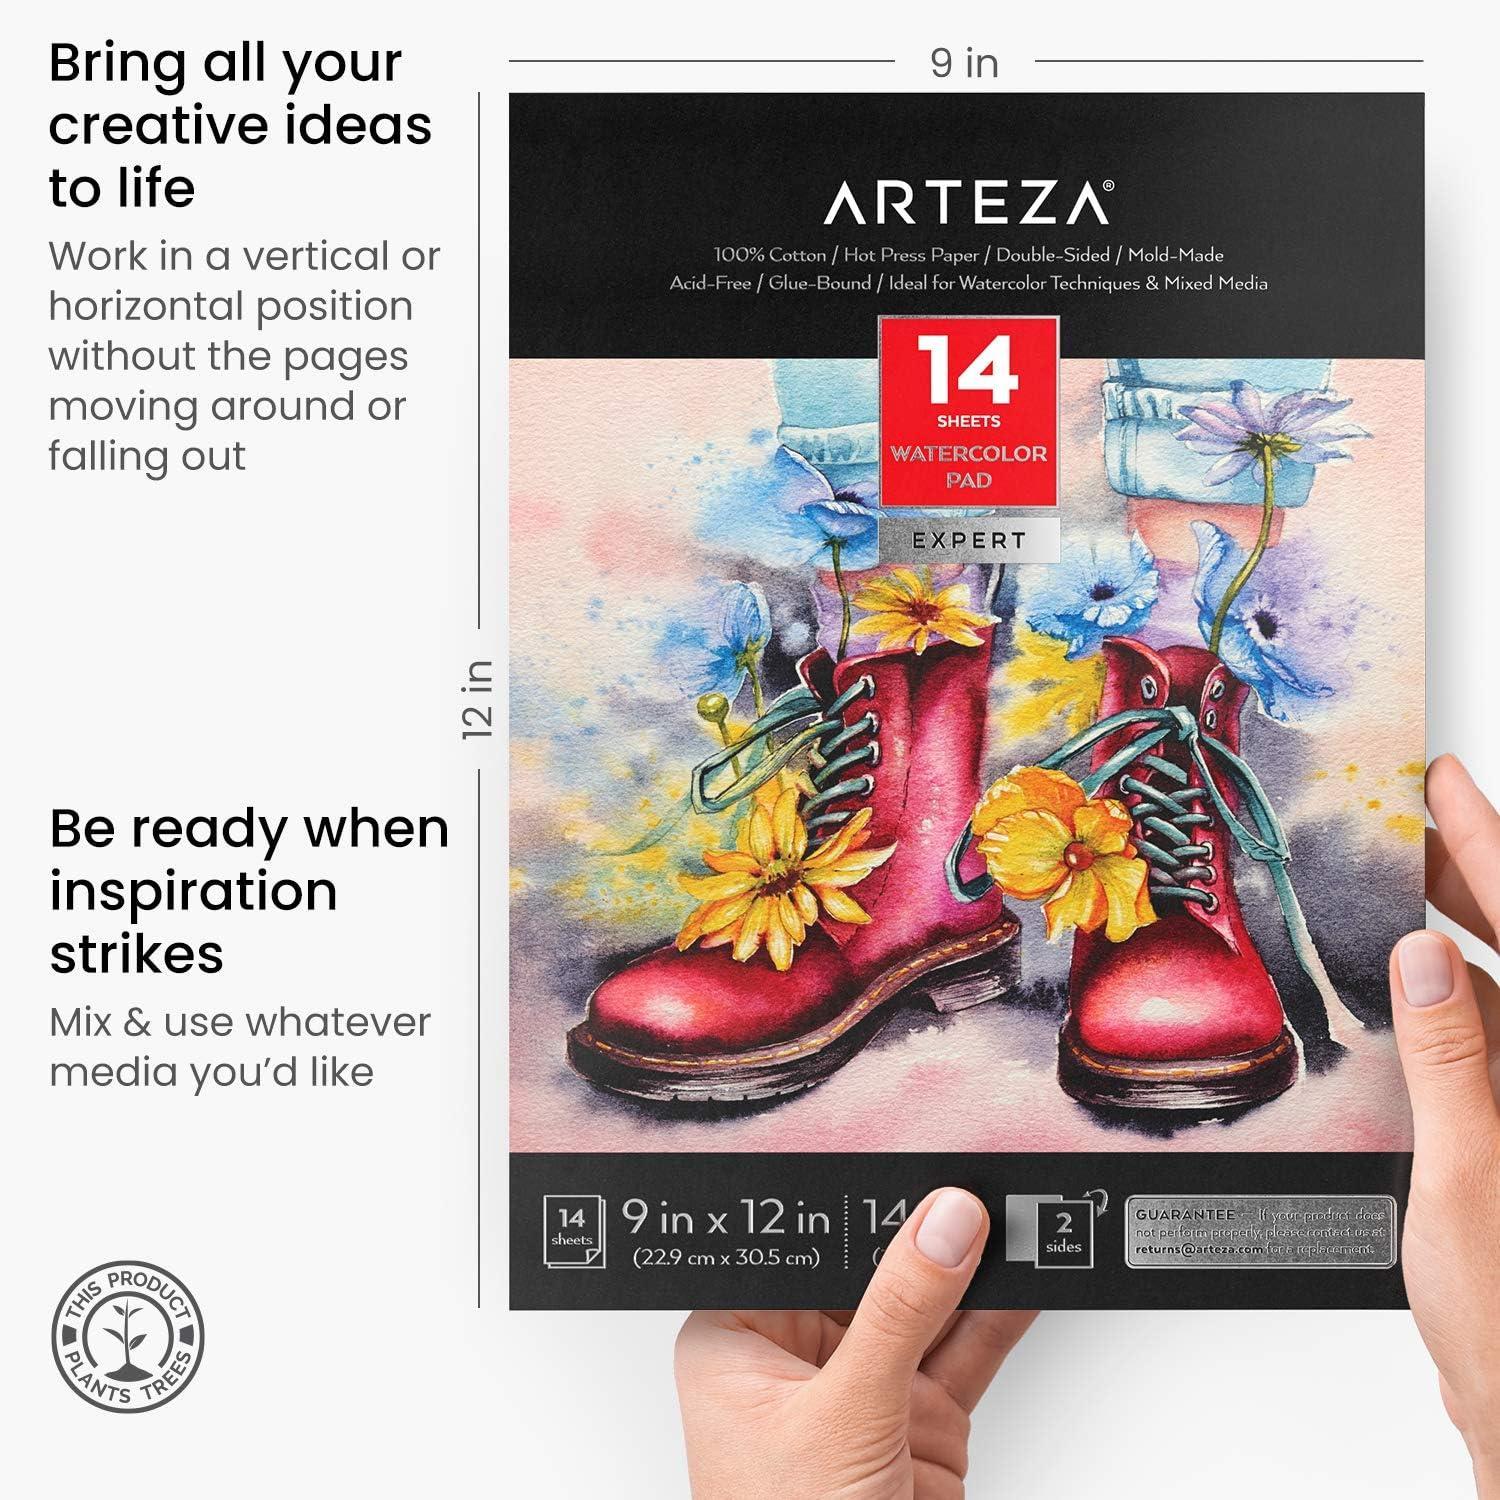 Arteza Watercolor Paper Pad, 9 x 12 Inches, 14 Sheets of Double